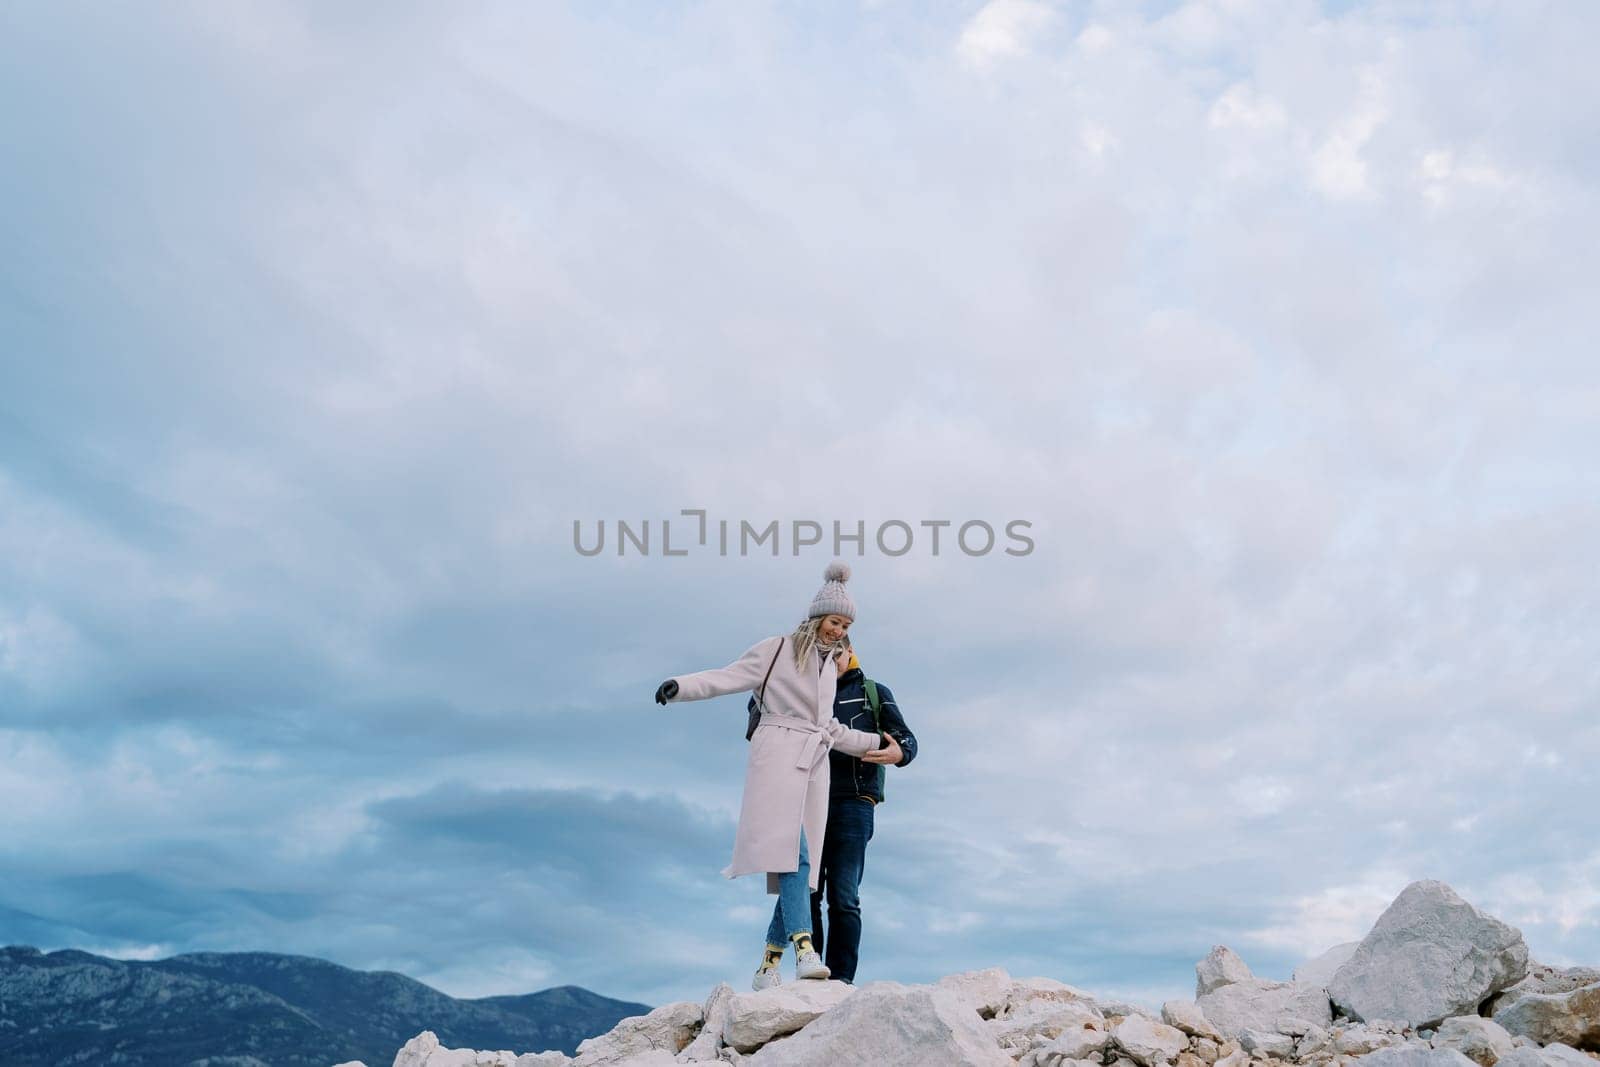 Man helps woman walk on the rocks, holding her hand in the mountains. High quality photo